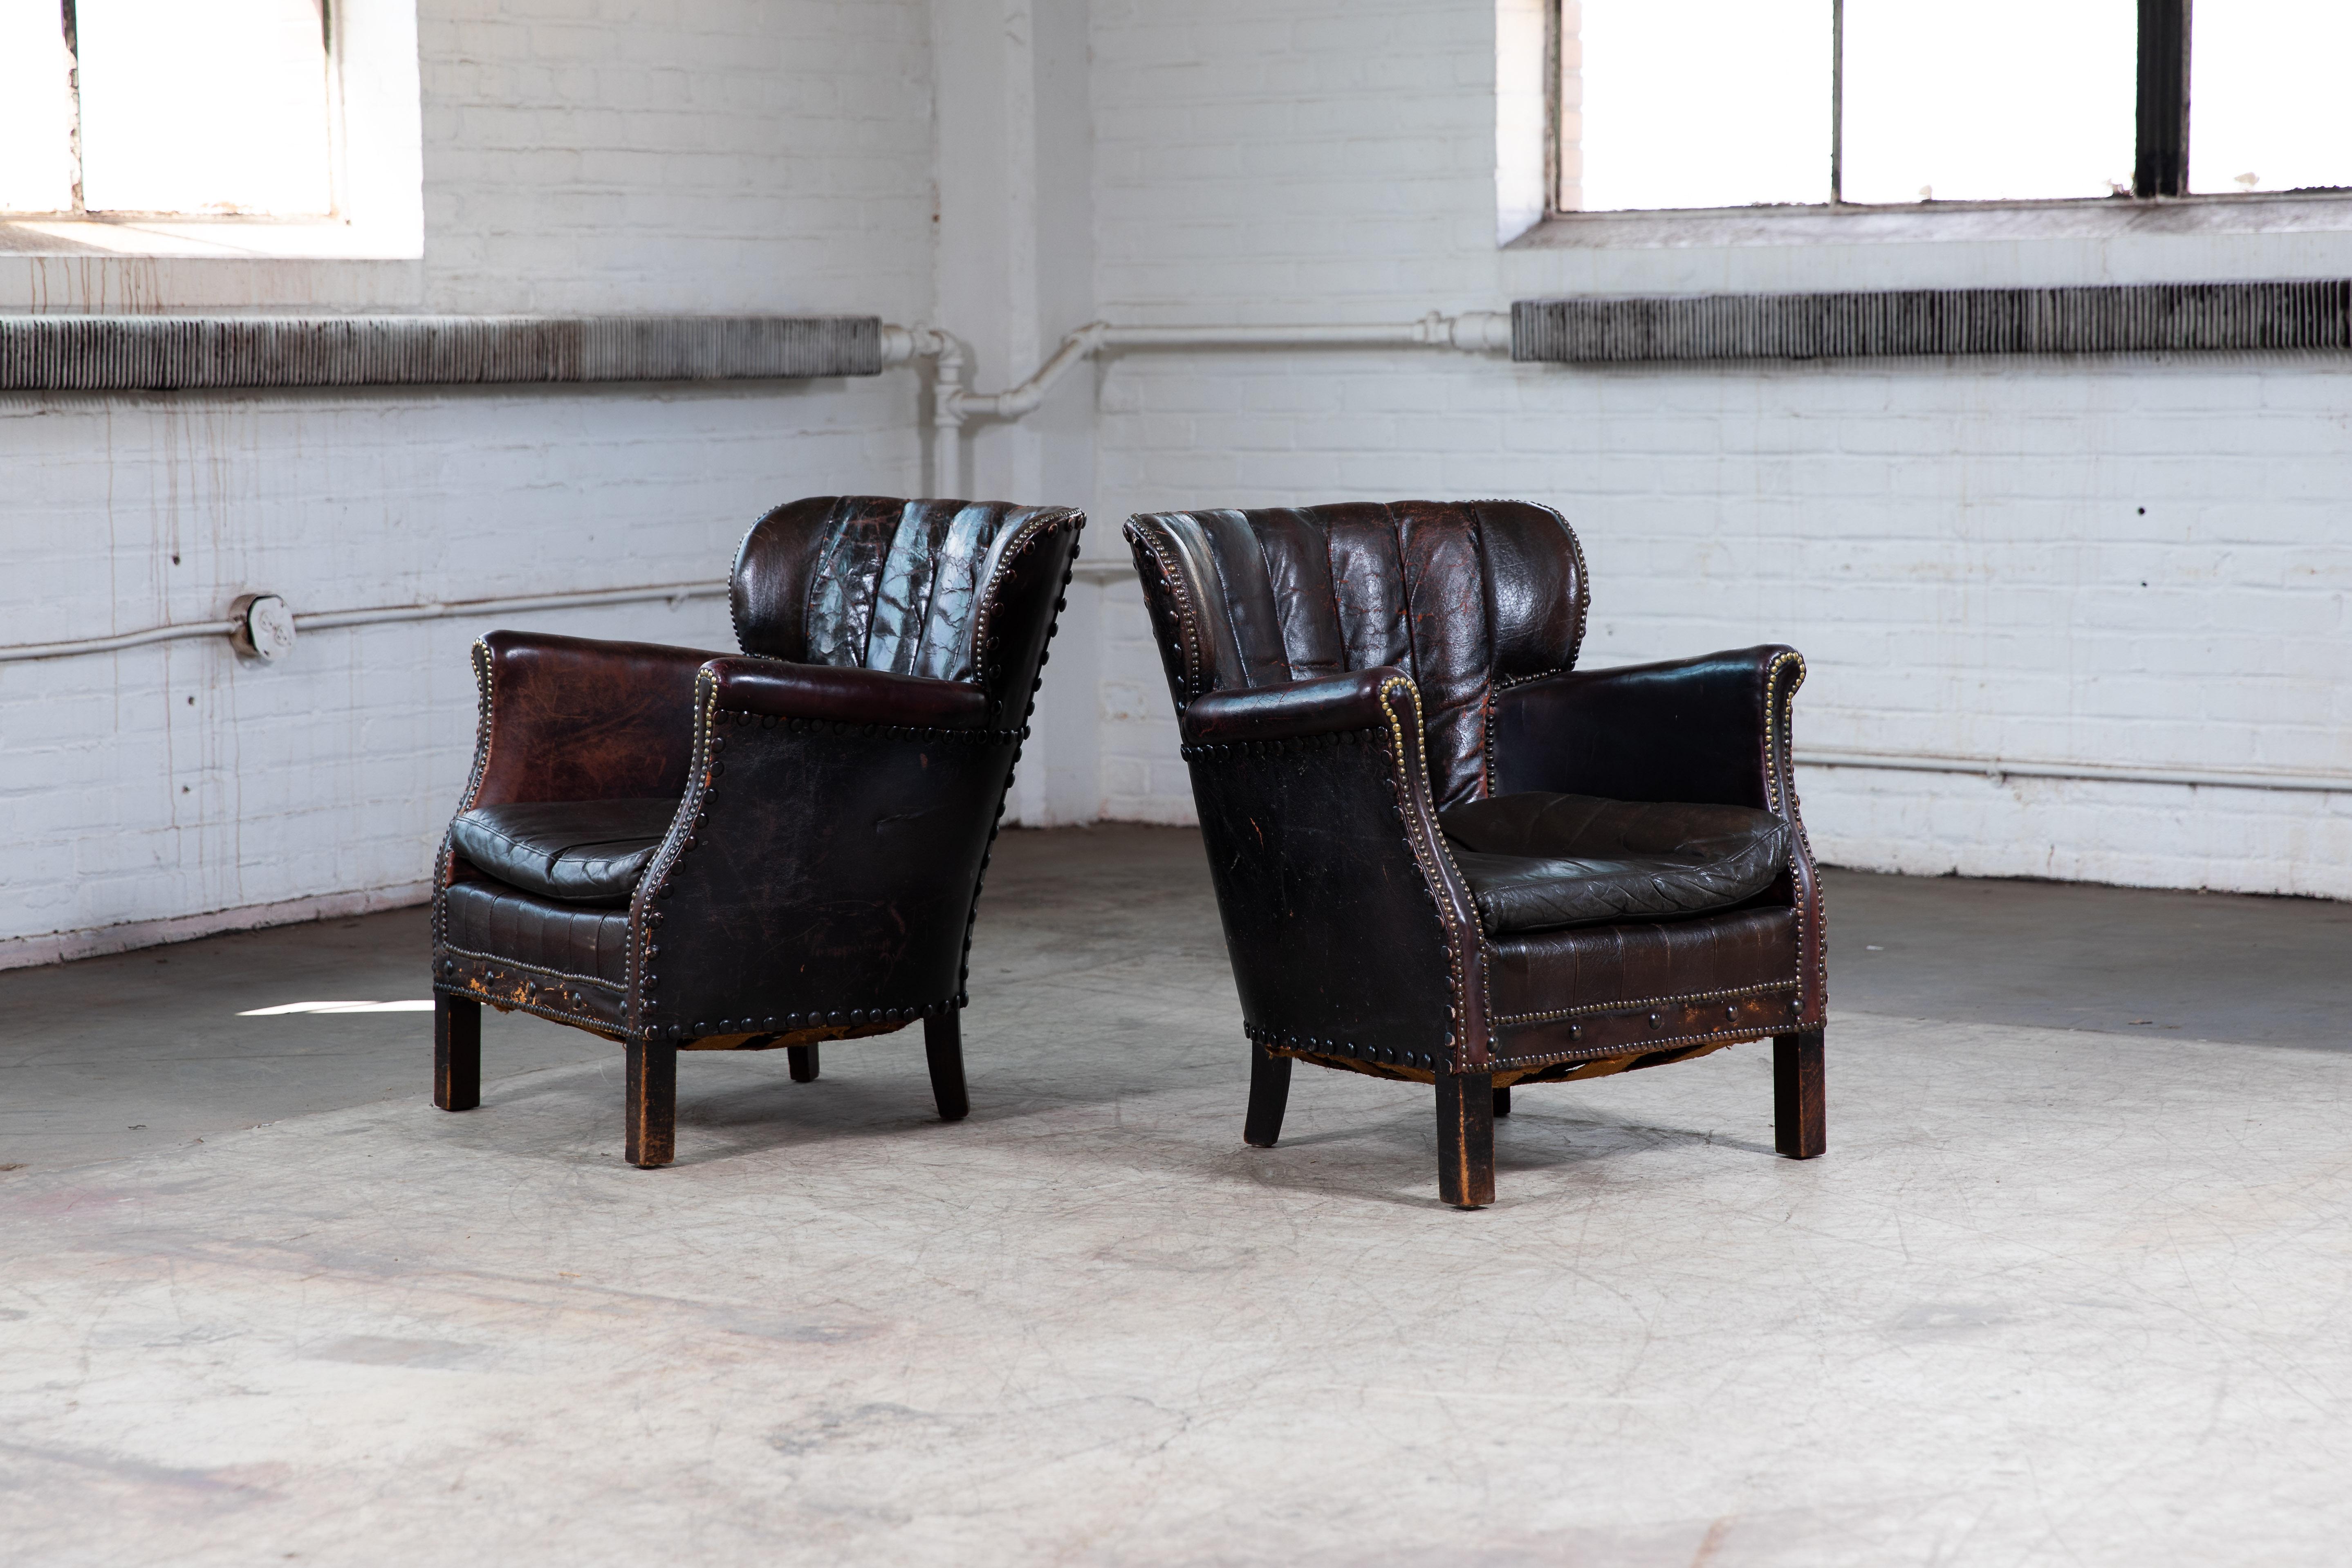 Charming pair of small scale Danish club armchairs attributed to Danish Furniture Maker Oskar Hansen around the mid-1930s. Covered in original black leather with tufted back with some red and brown colors peaking through herre and there where the